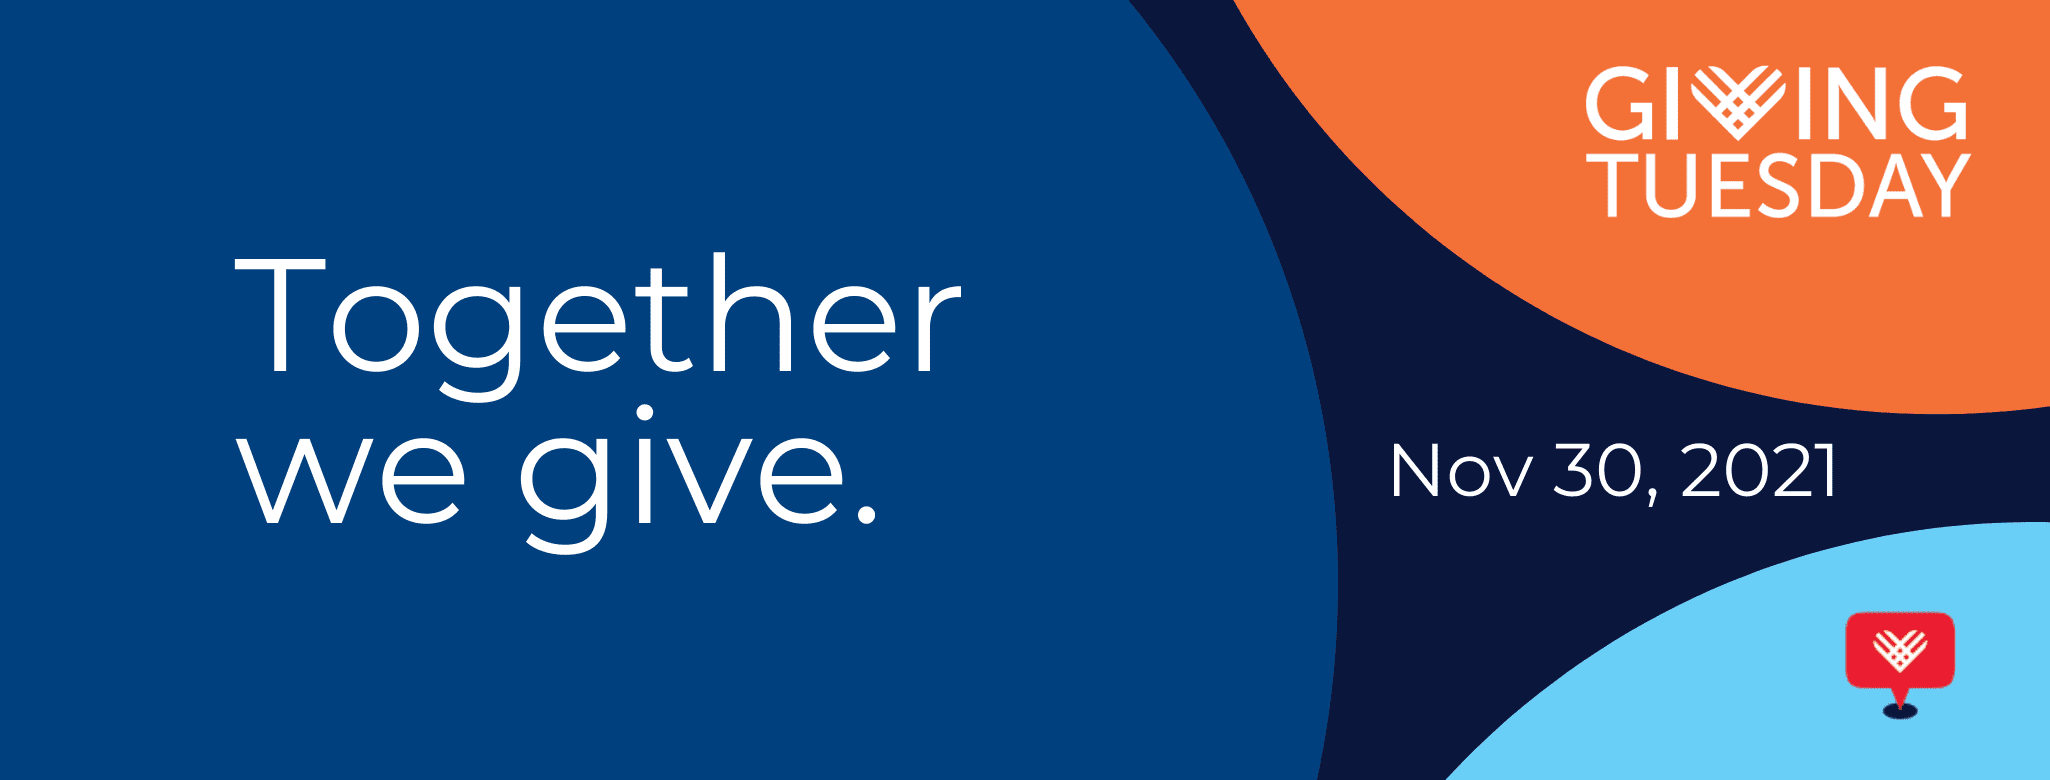 Together we give. Giving Tuesday | Nov 30, 2021